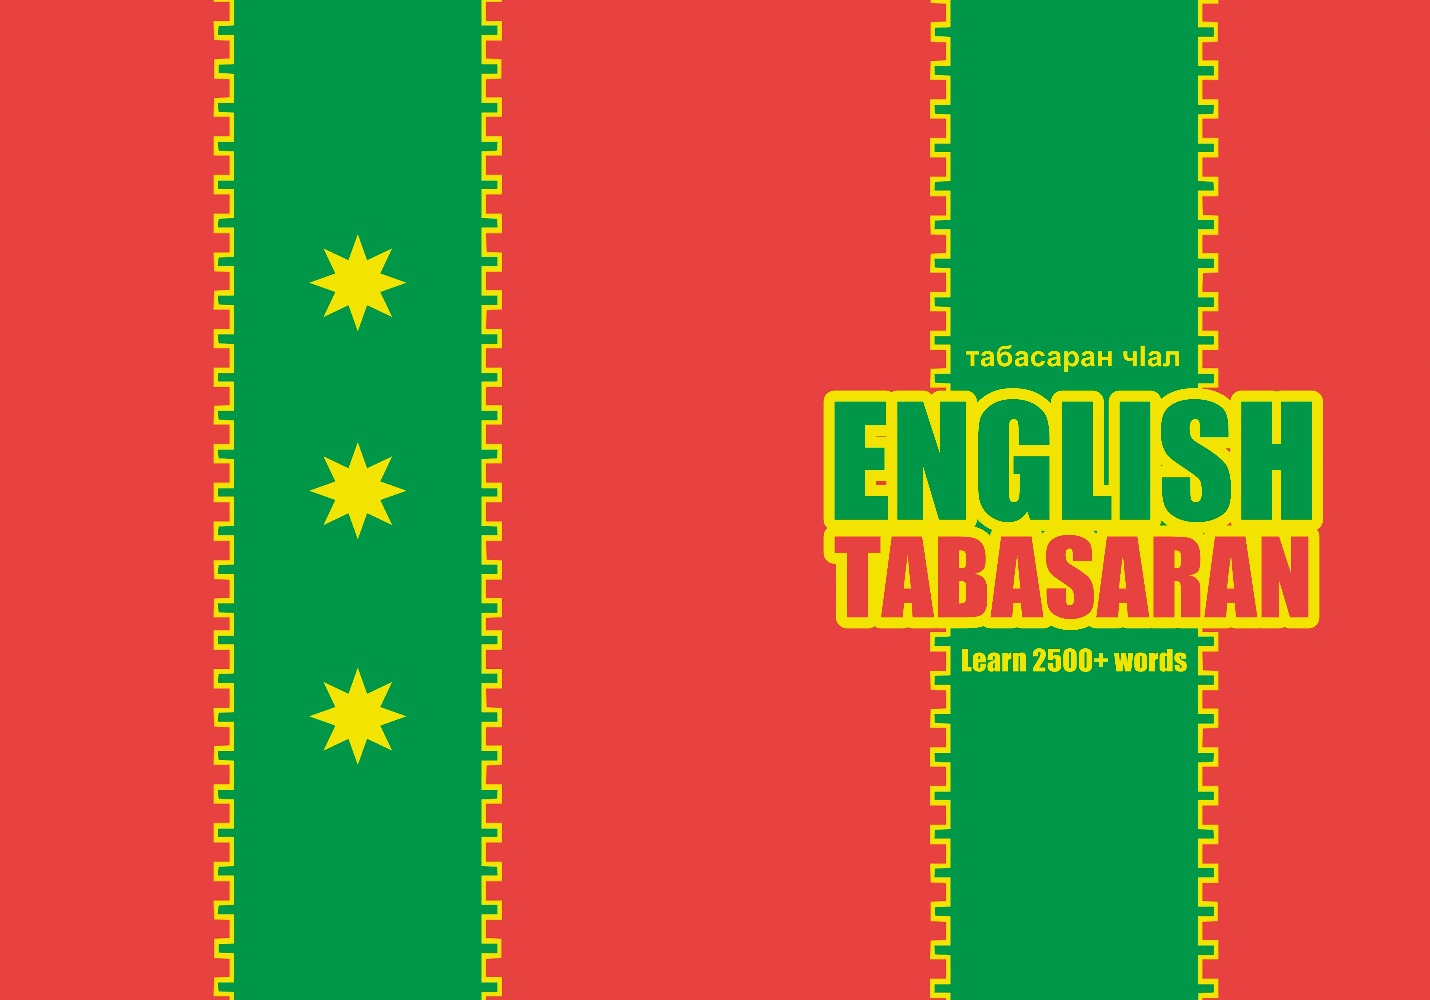 Tabasaran language learning notebook cover